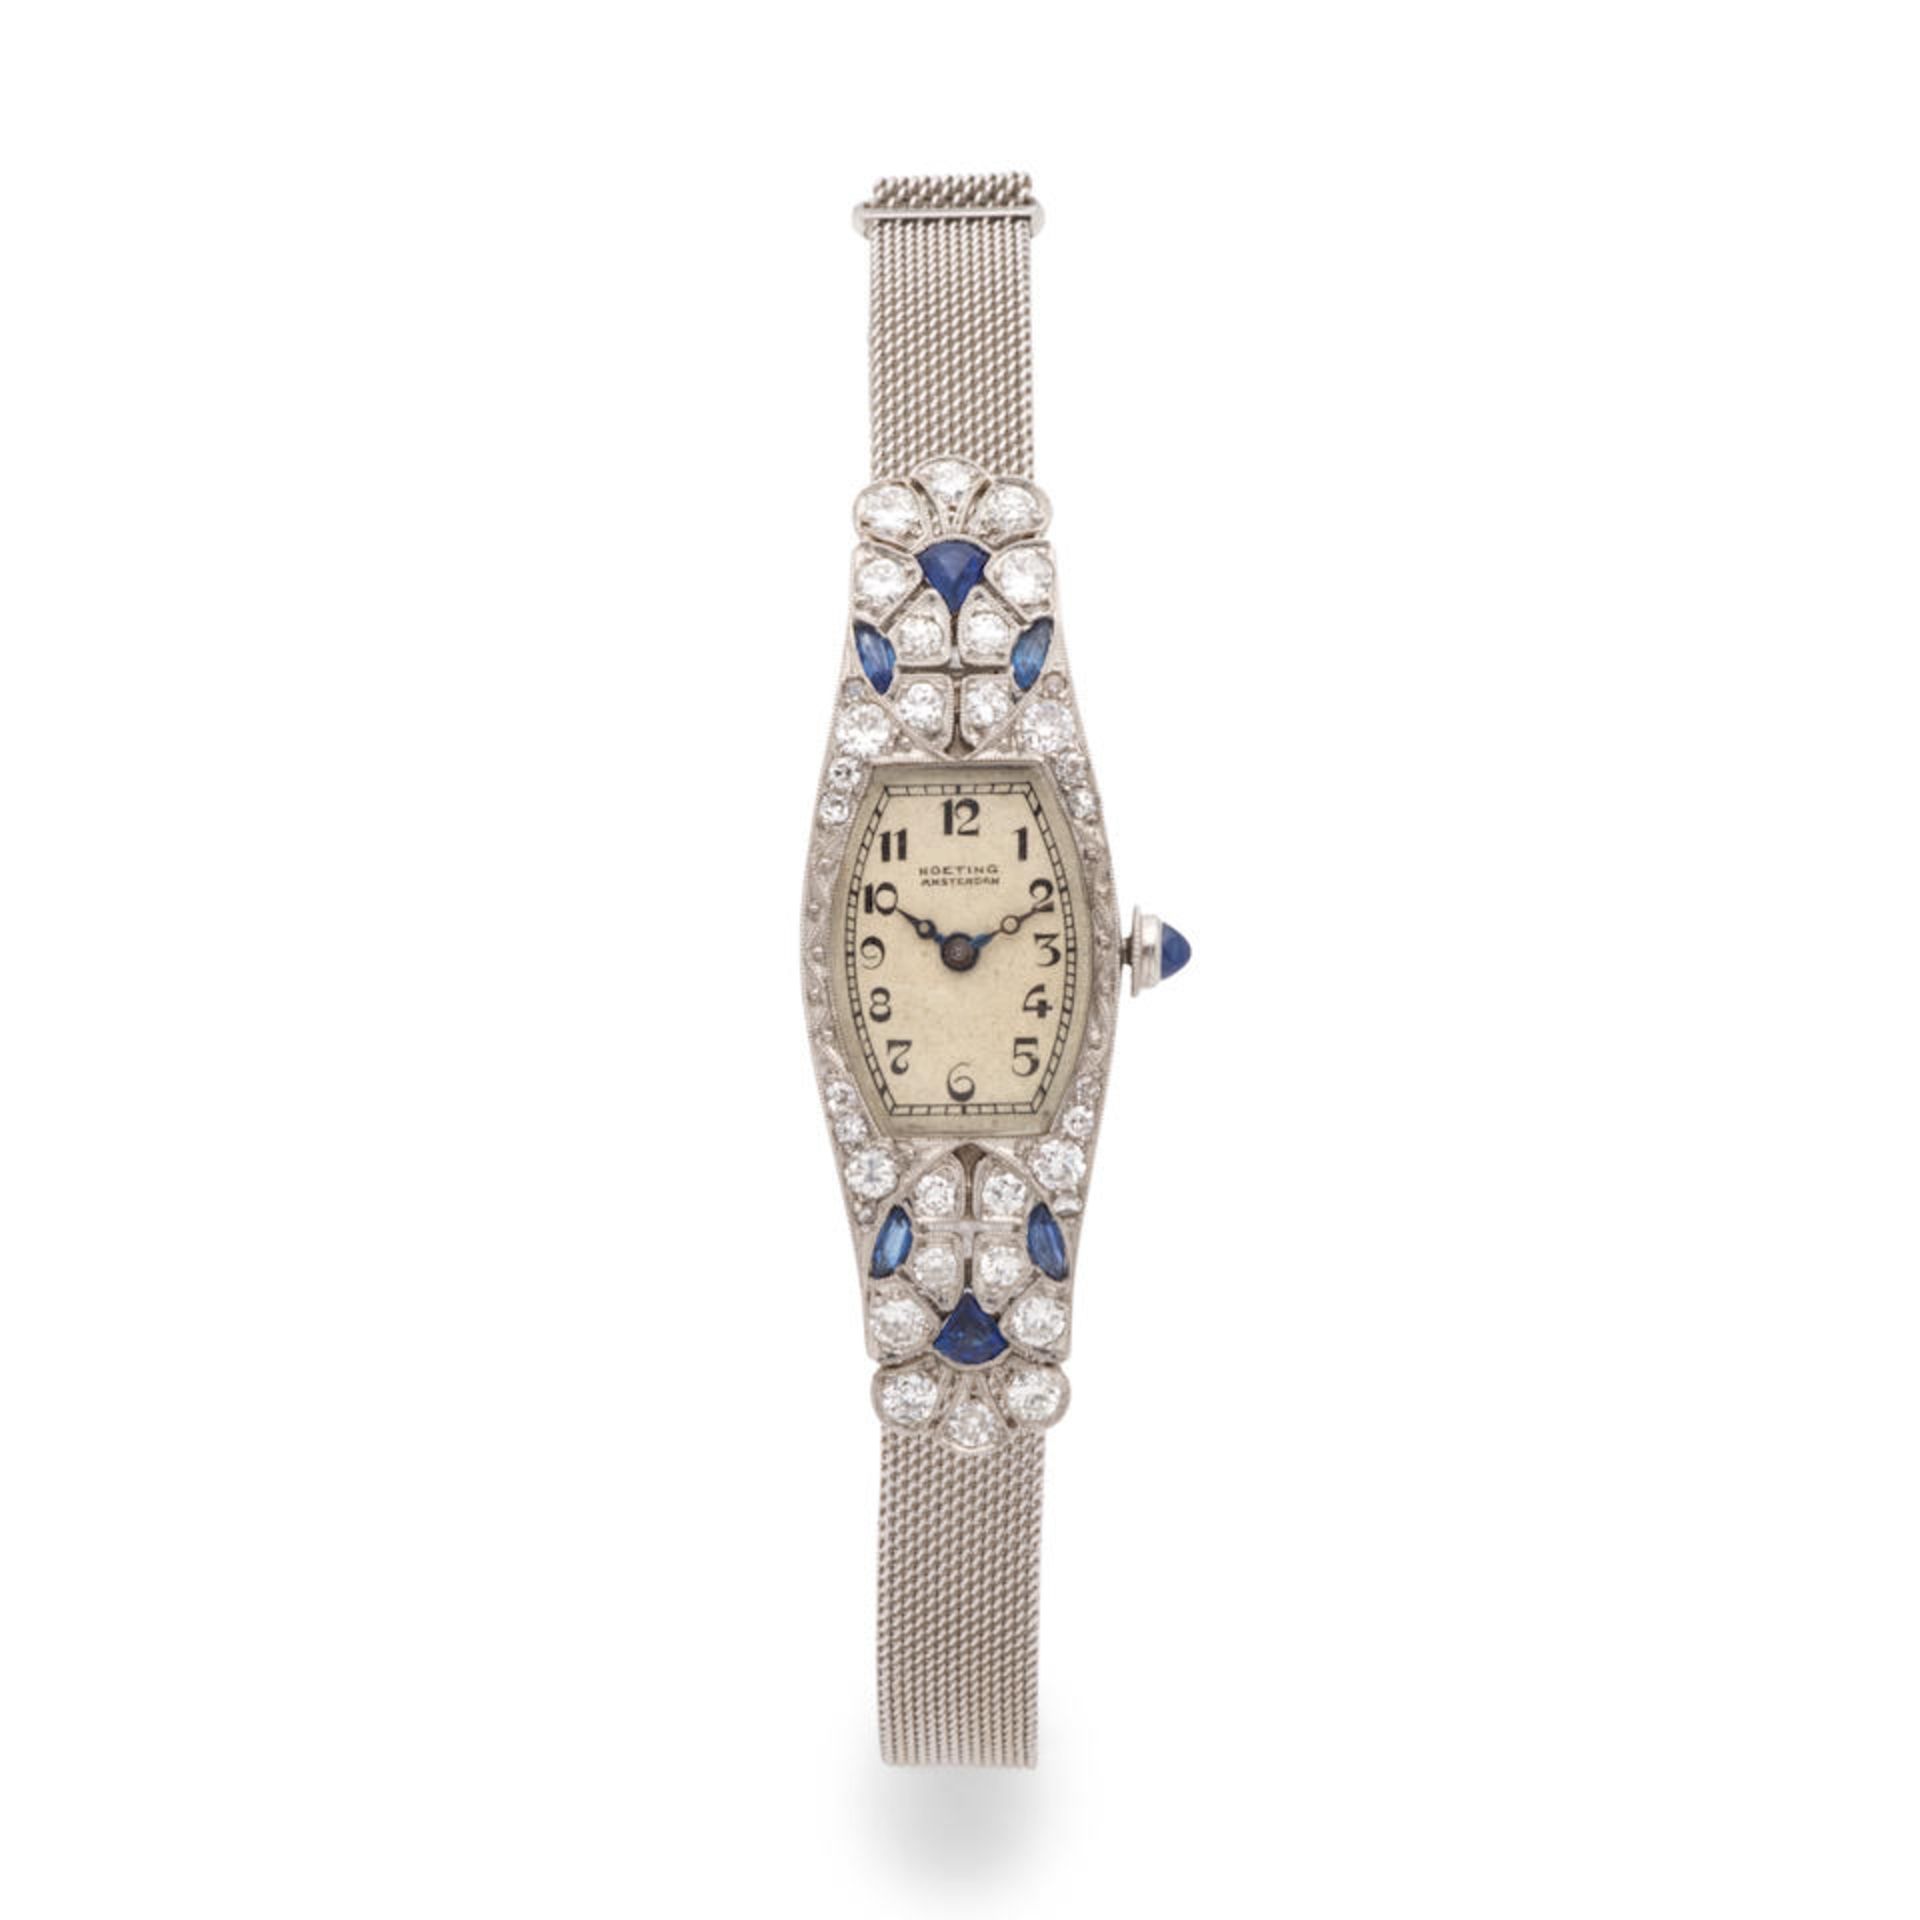 HOETING AMSTERDAM: LADY'S SAPPHIRE AND DIAMOND BRACELET COCKTAIL WATCH HOETING AMSTERDAM: MONTR...